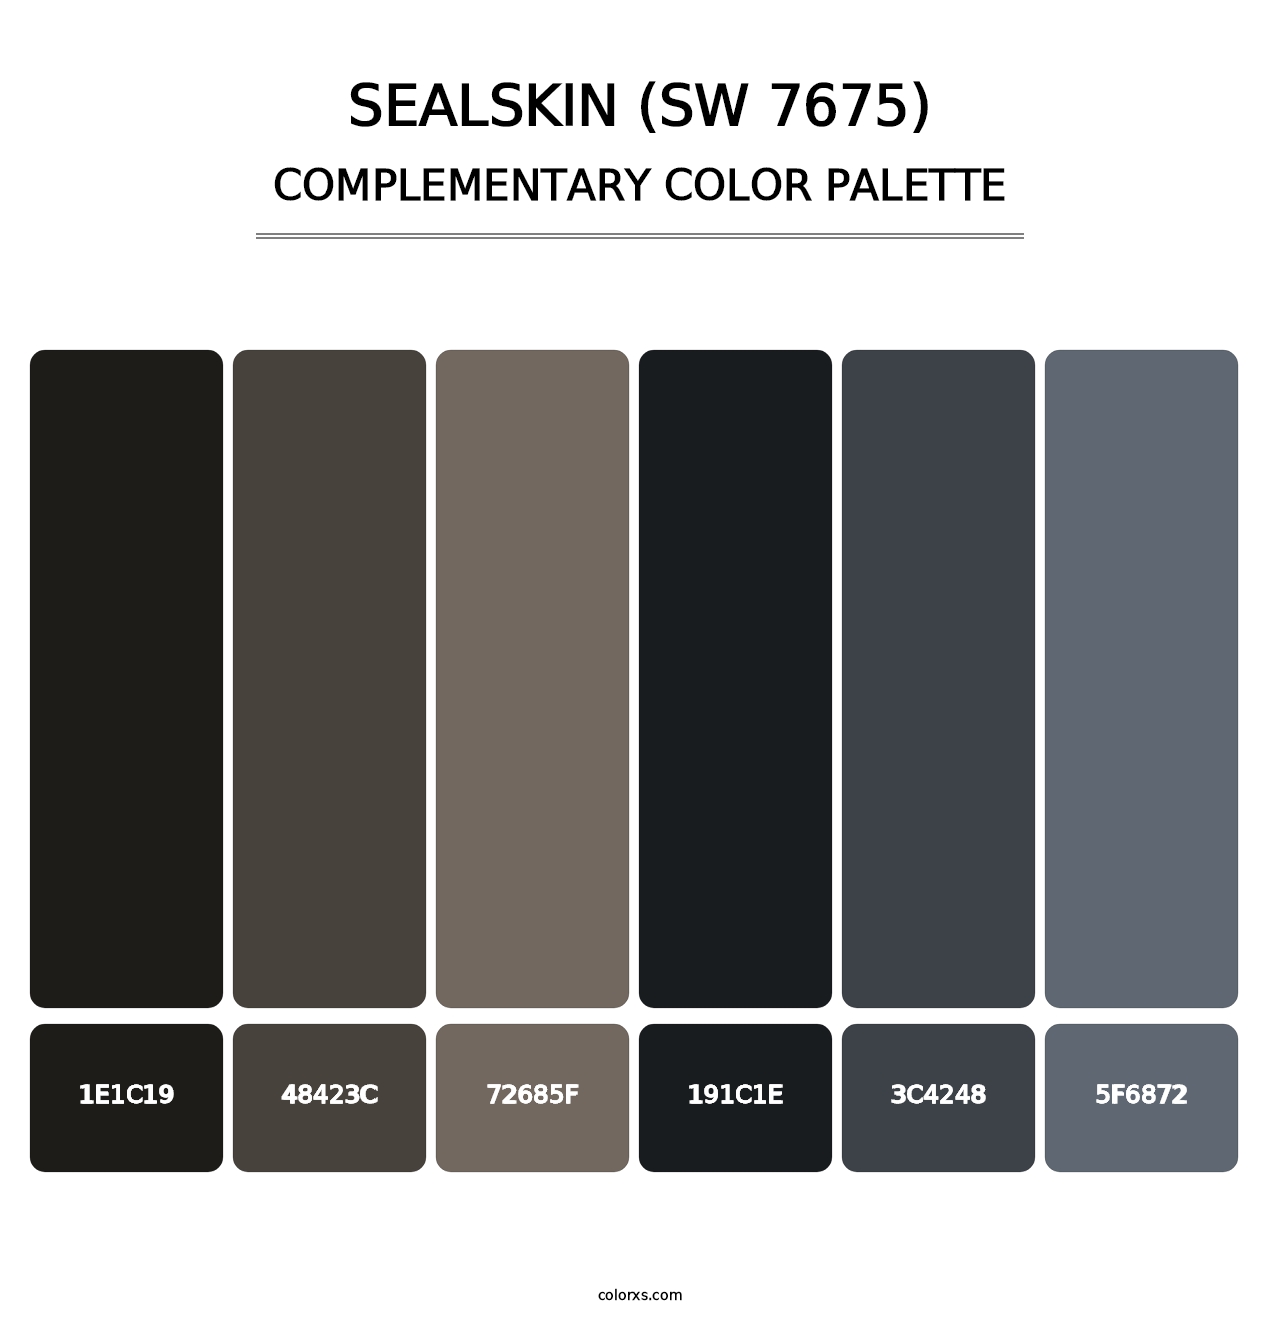 Sealskin (SW 7675) - Complementary Color Palette